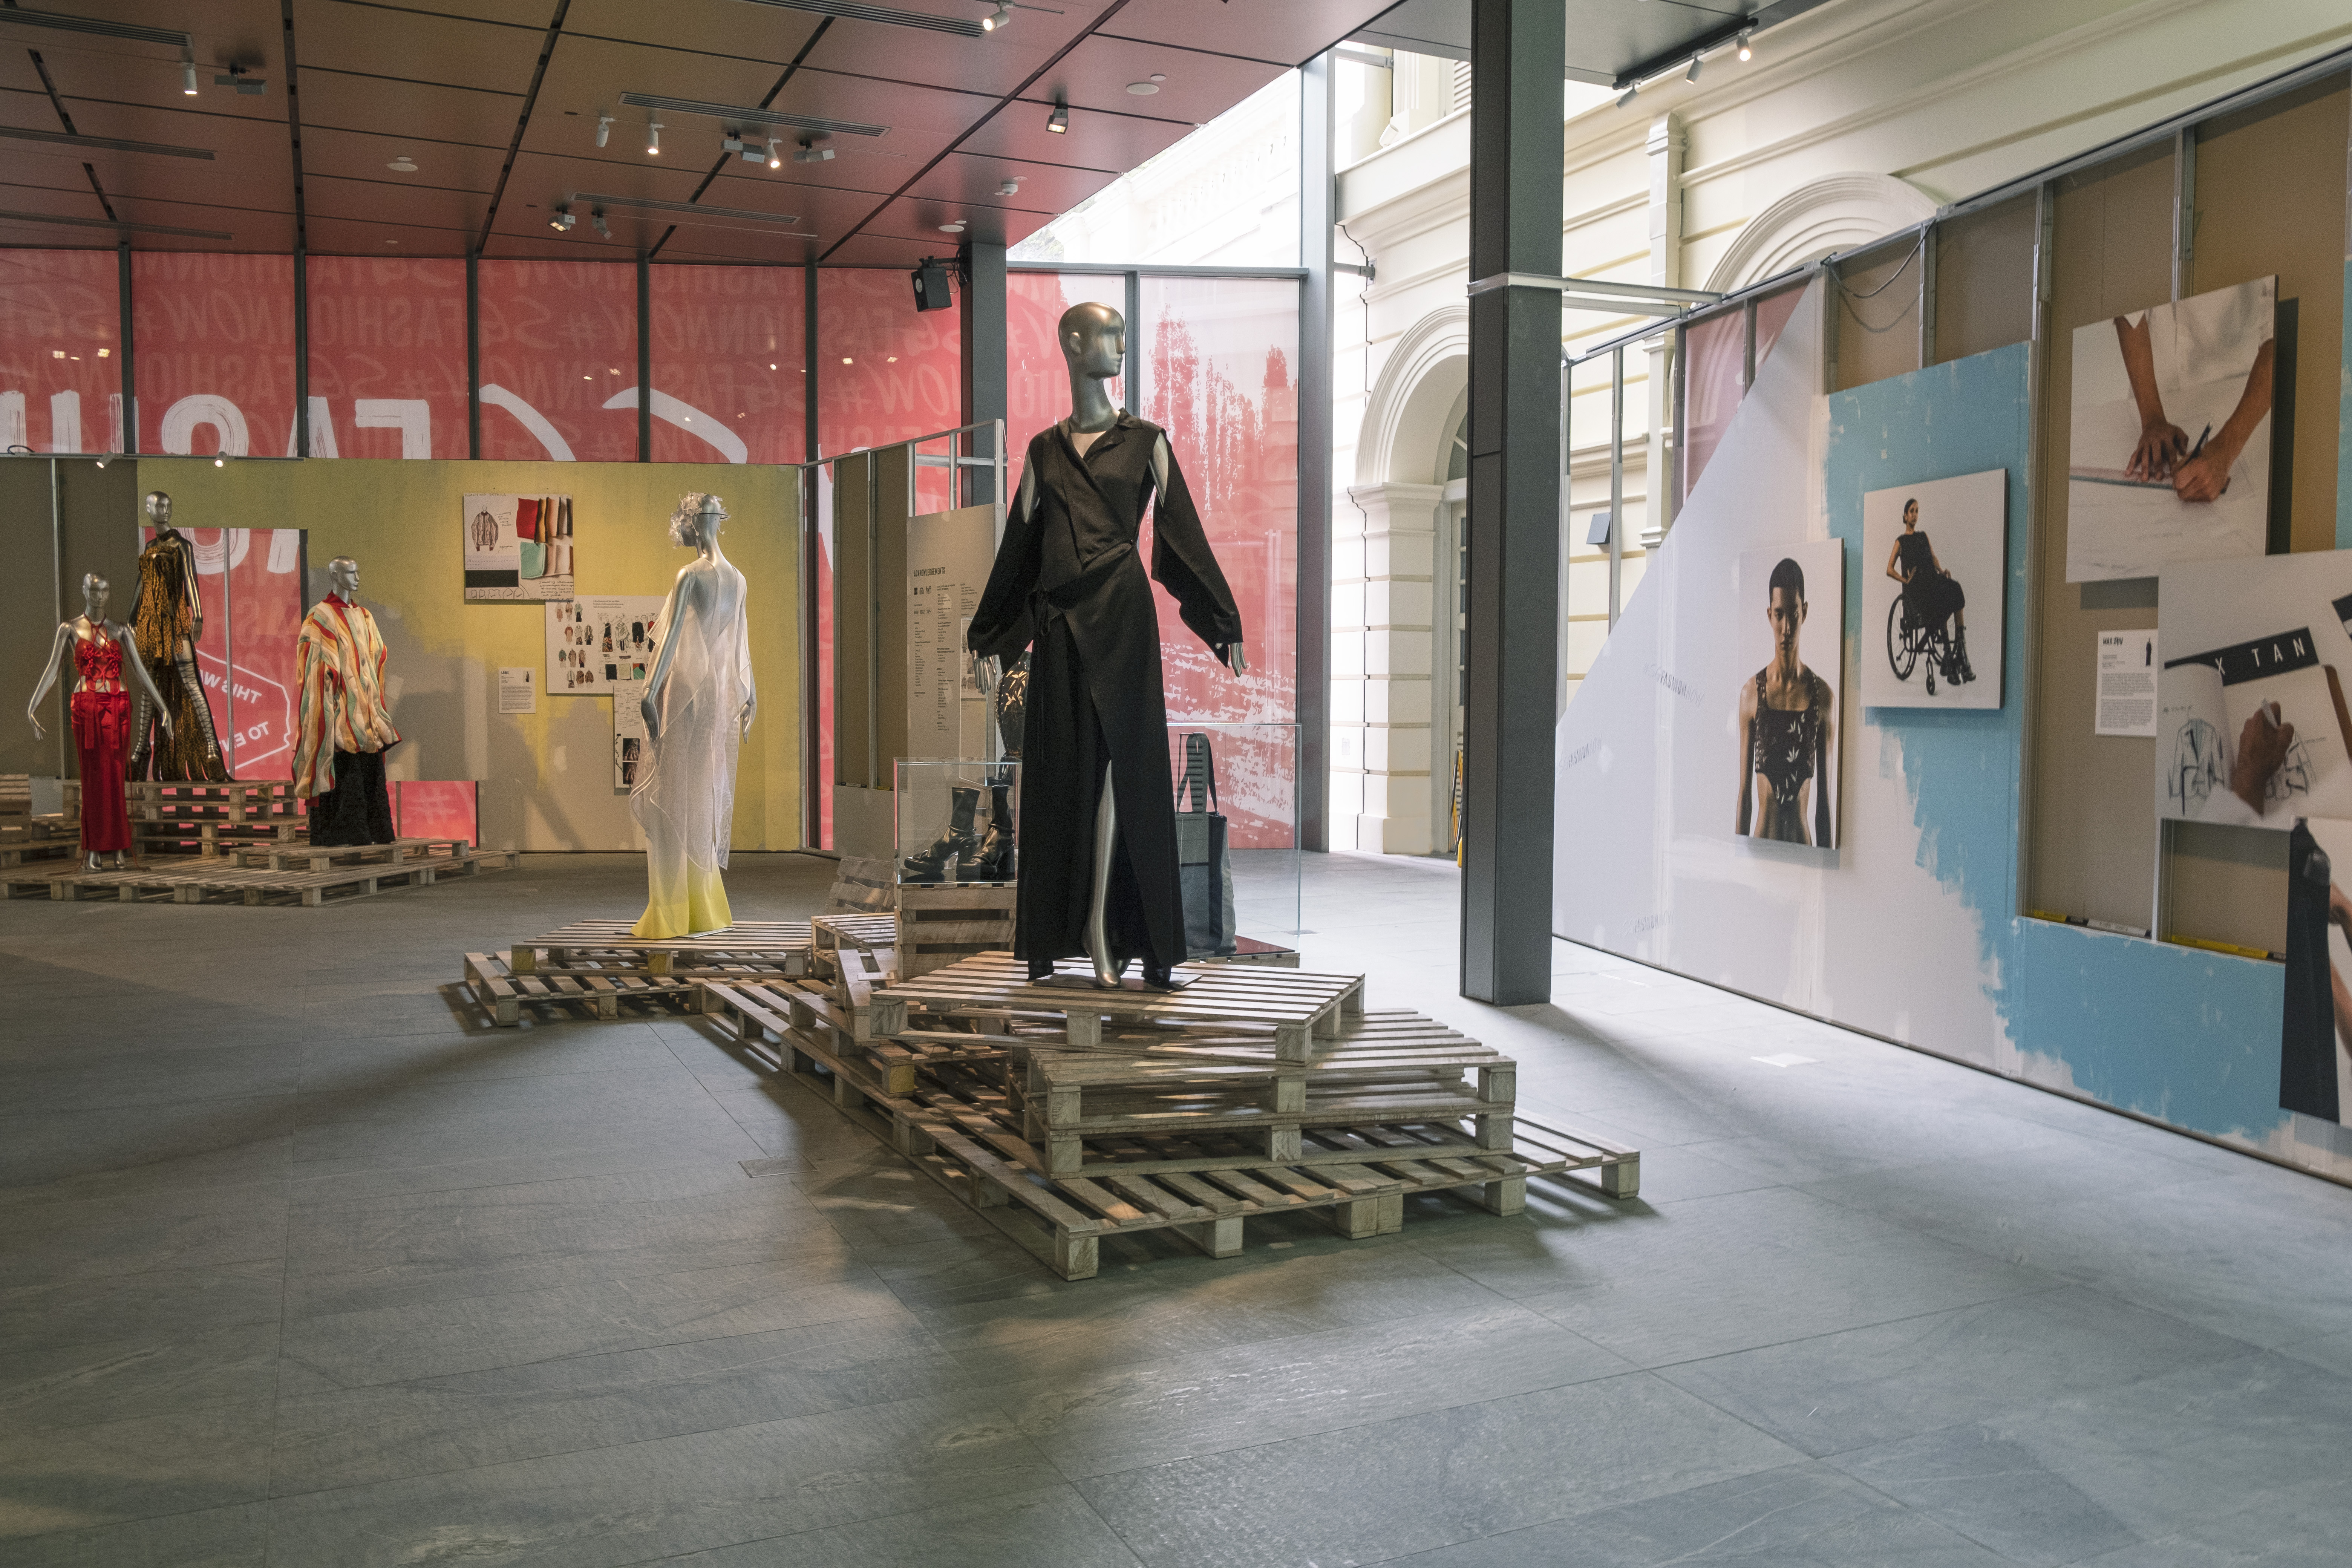 A gallery space with wooden platforms on the ground and a mannequin wearing a black ensemble standing on it. The walls has posters showing the designing process. 